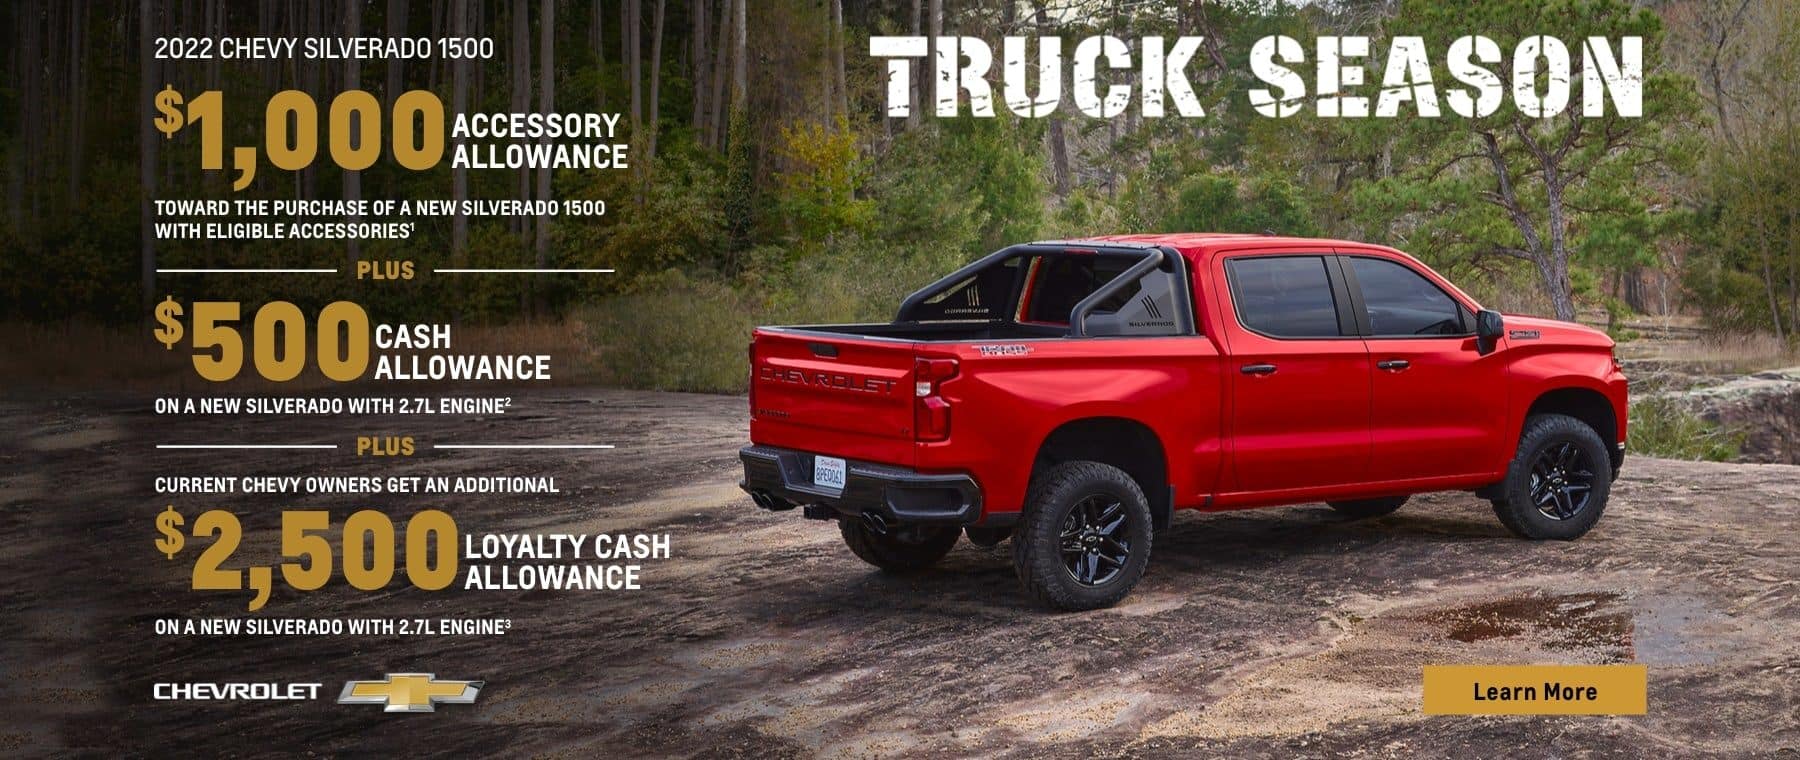 2022 Chevy Silverado 1500. Truck Season. Make it your own. $1,000 accessory allowance toward the purchase of a new Silverado 1500 with eligible accessories. Plus, $500 cash allowance when you purchase or lease a new Silverado with 2.7L Engine. Plus, current Chevy owners get an additional $2,500 cash allowance when you purchase a new Silverado with 2.7L engine.